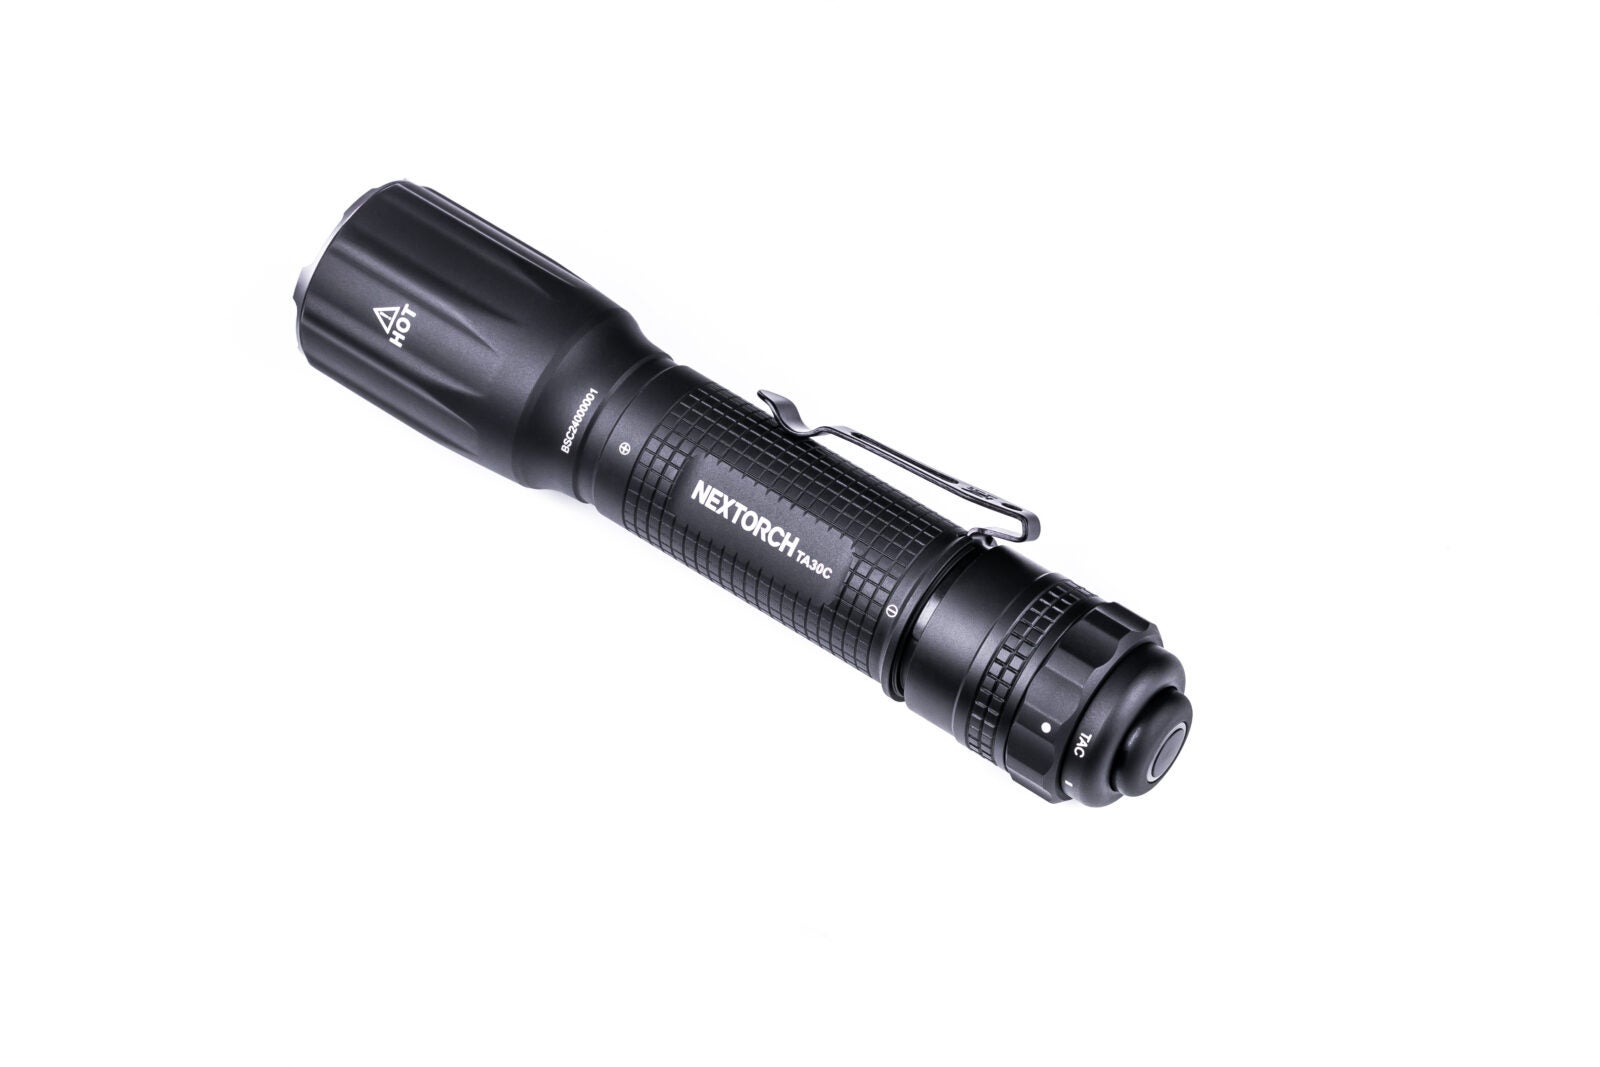 NEW from NEXTORCH - the TA30C Tactical Flashlight